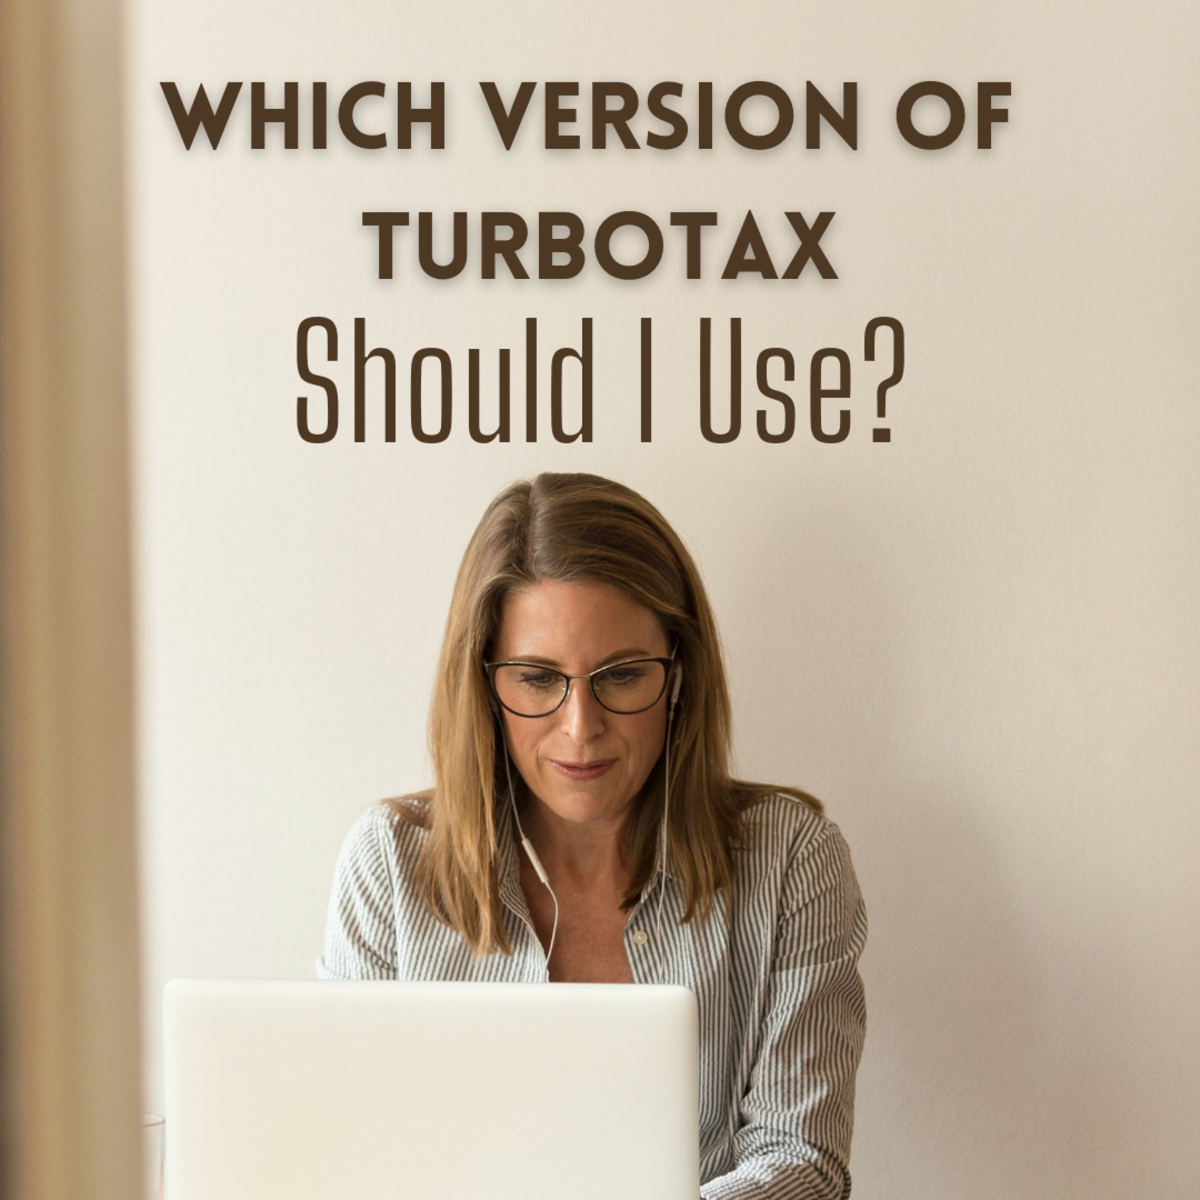 Consider your lifestyle when deciding which version of TurboTax software suits your needs best; also consider how much you want to pay for convenience.